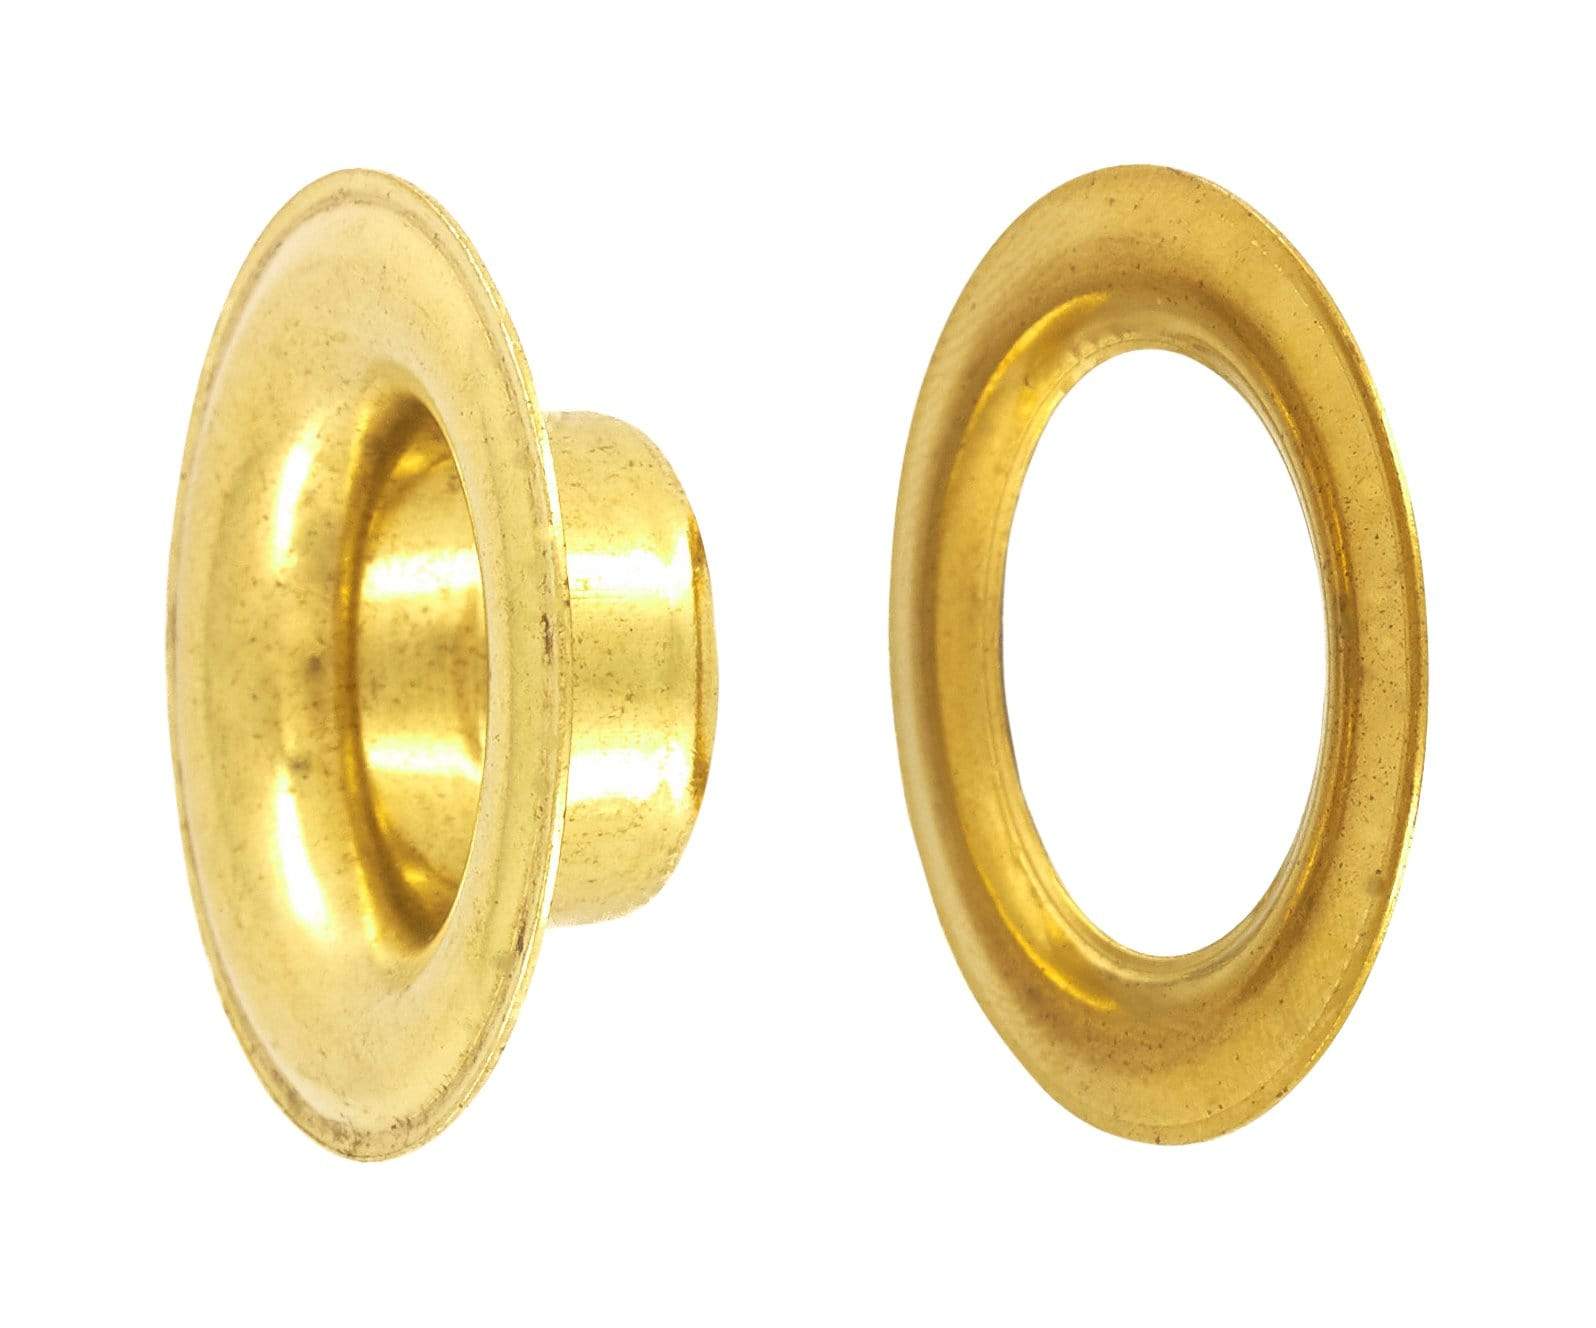 Ohio Travel Bag Fasteners #5 Brass, Grommet with Washer, Solid Brass, #GROM-5-SB GROM-5-SB